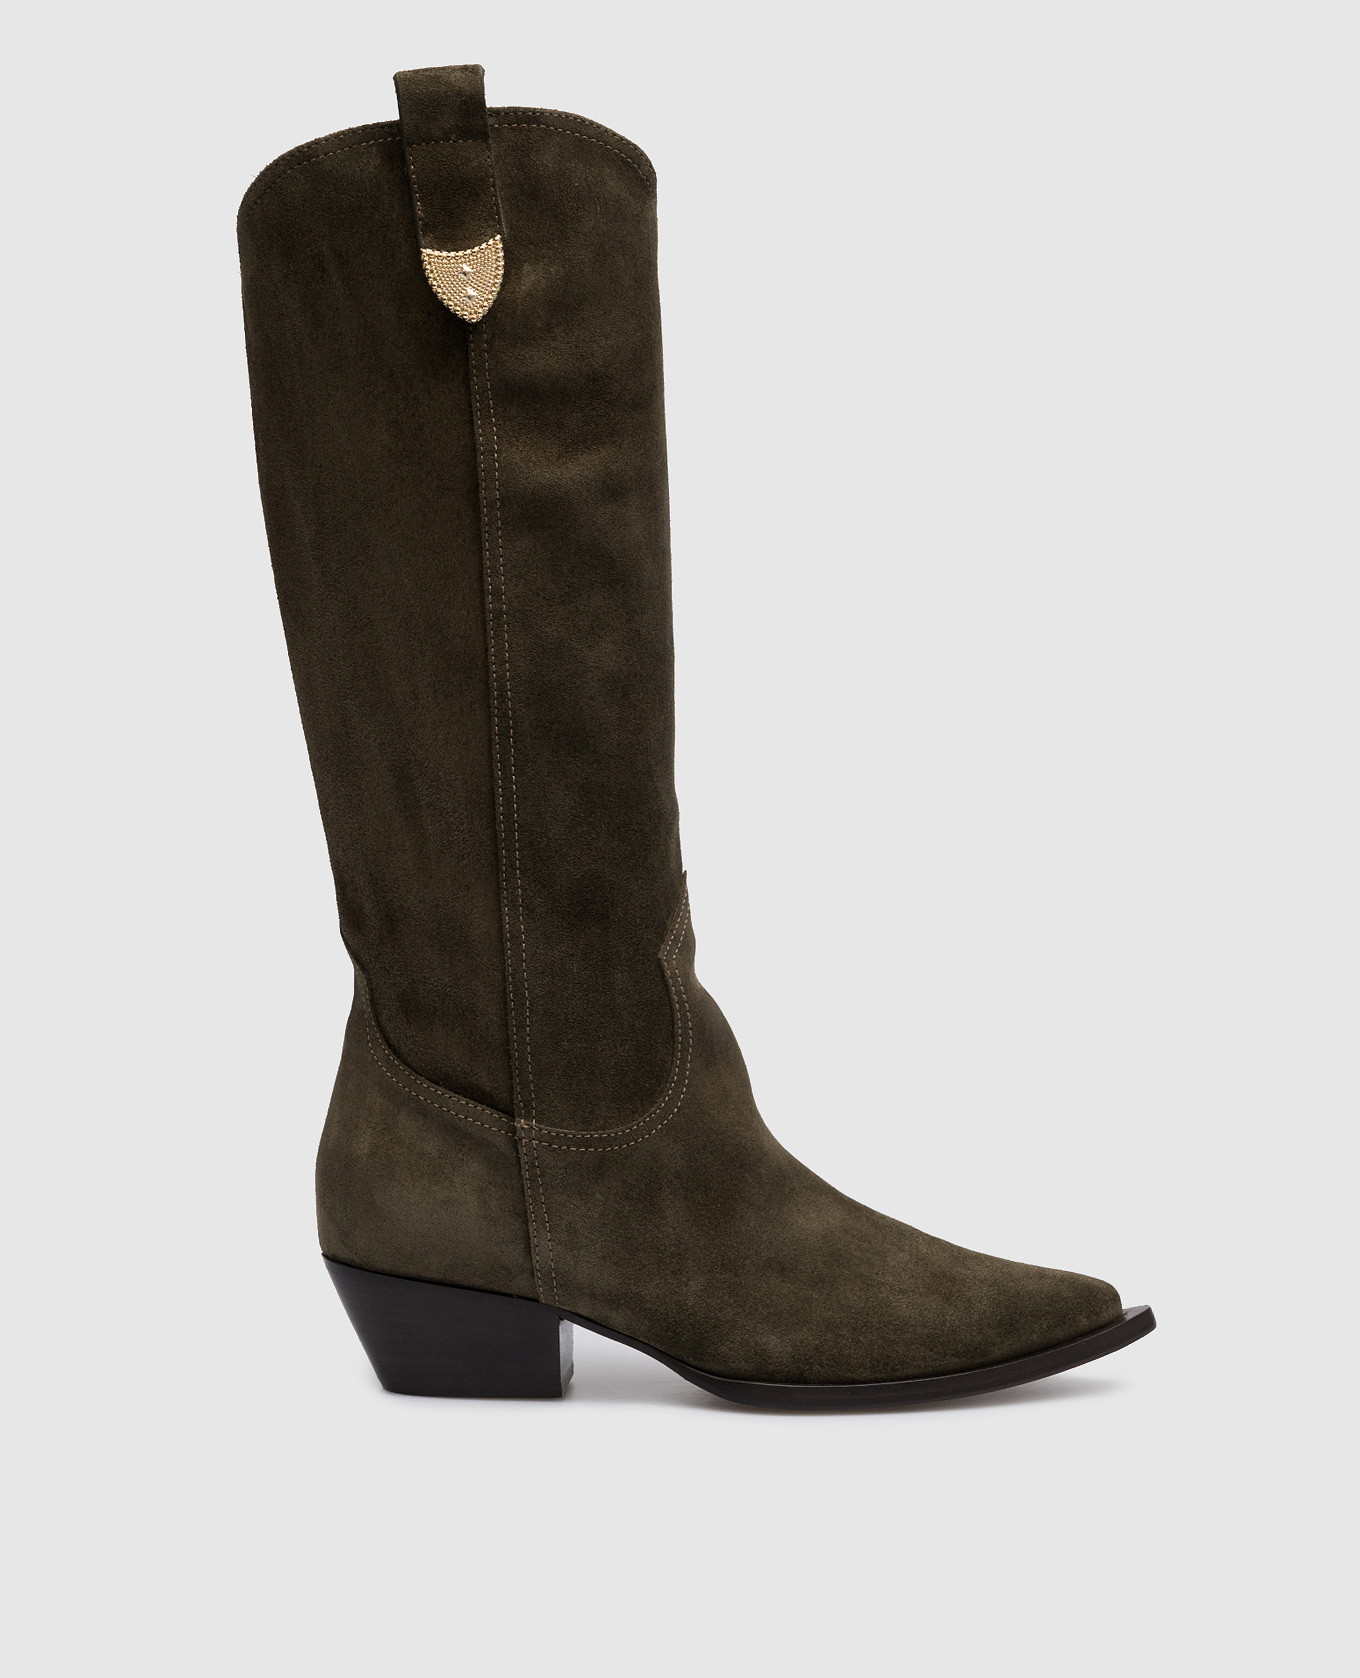 Dallas khaki suede boots with metallic details